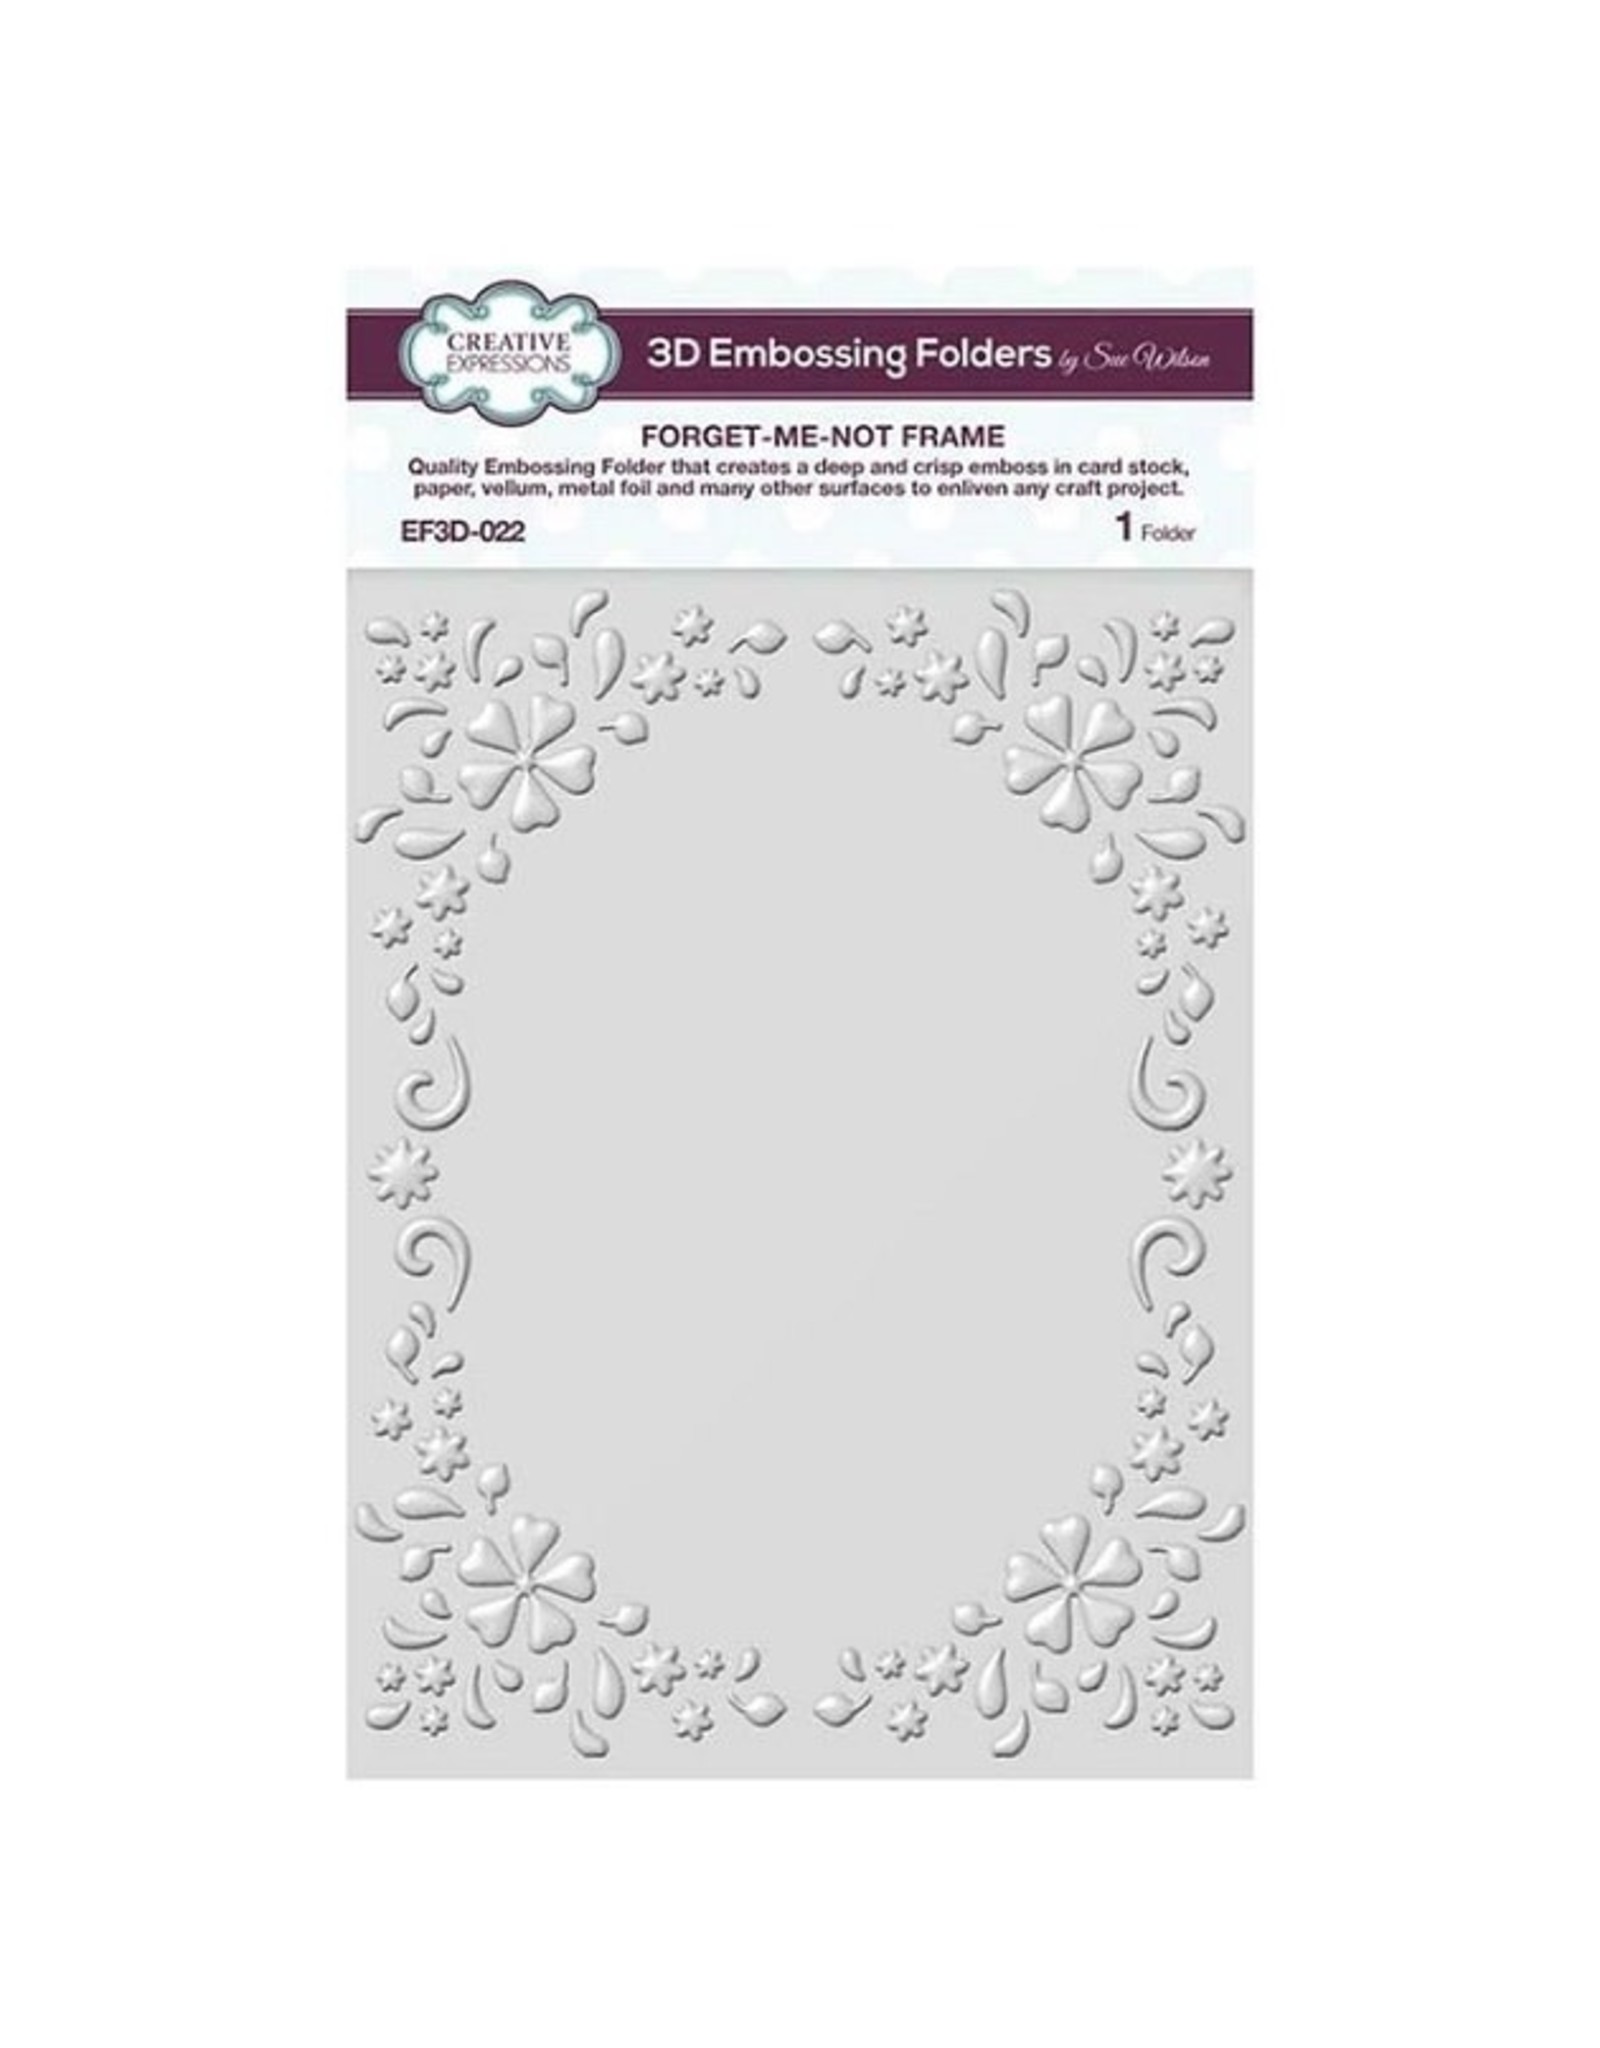 Creative Expressions 3D Embossing Folder -  Forget-me-not Frame  5 3/4 x 7 1/2